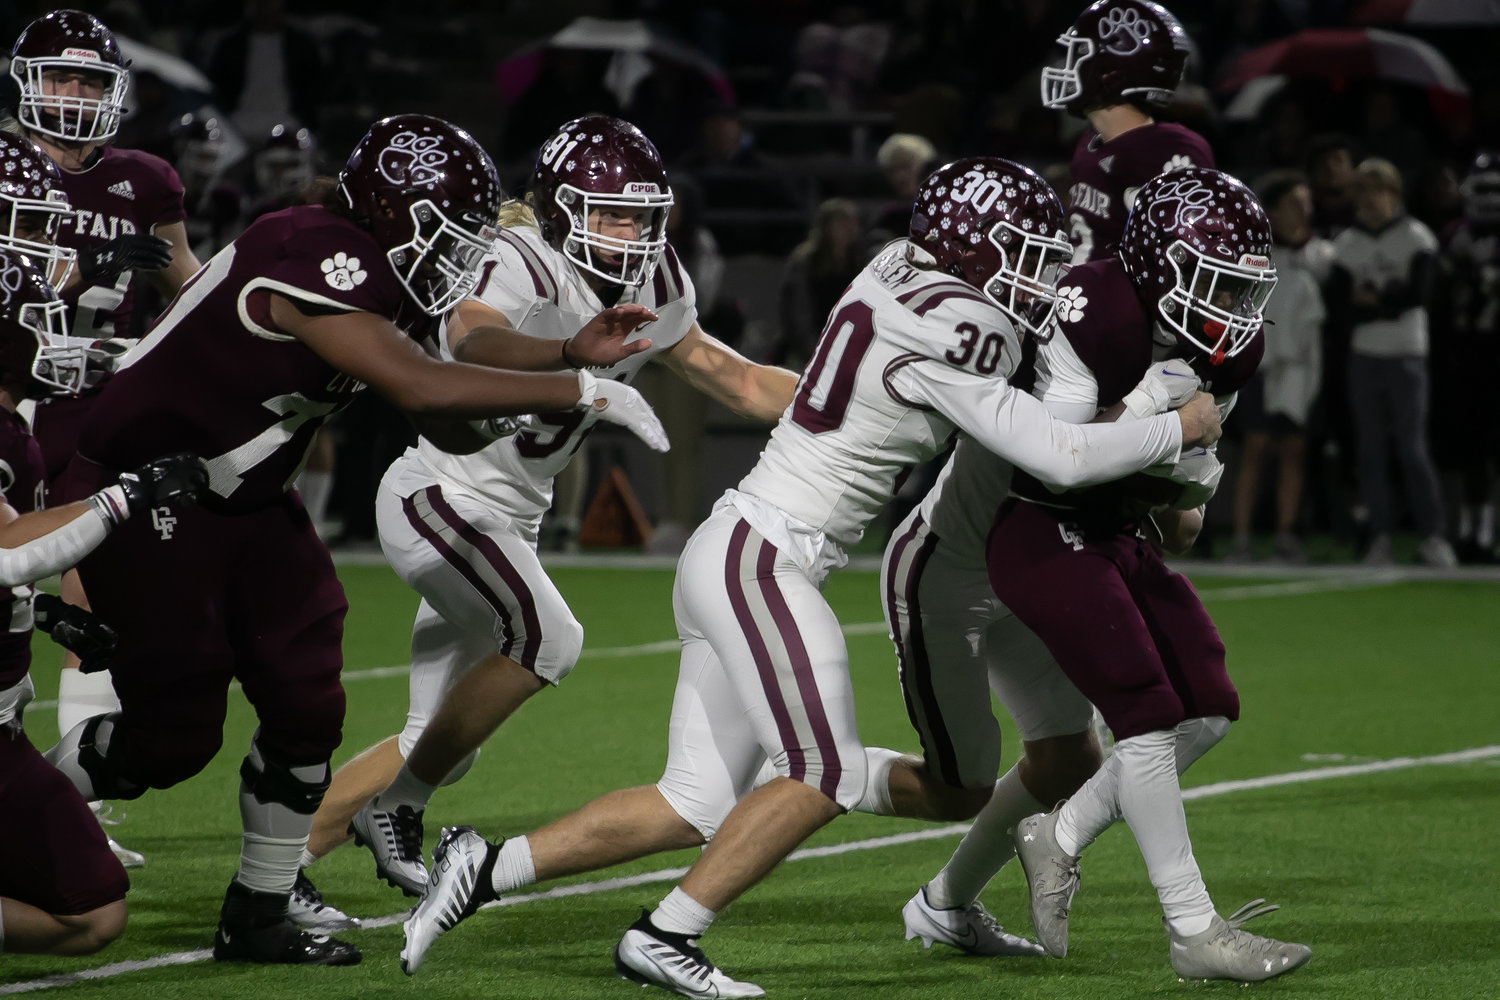 Cinco Ranch's  defense makes a stop on a ball carrier during Friday's Class 6A-Division I area round game between Cinco Ranch and Cy-Fair at Pridgeon Stadium.